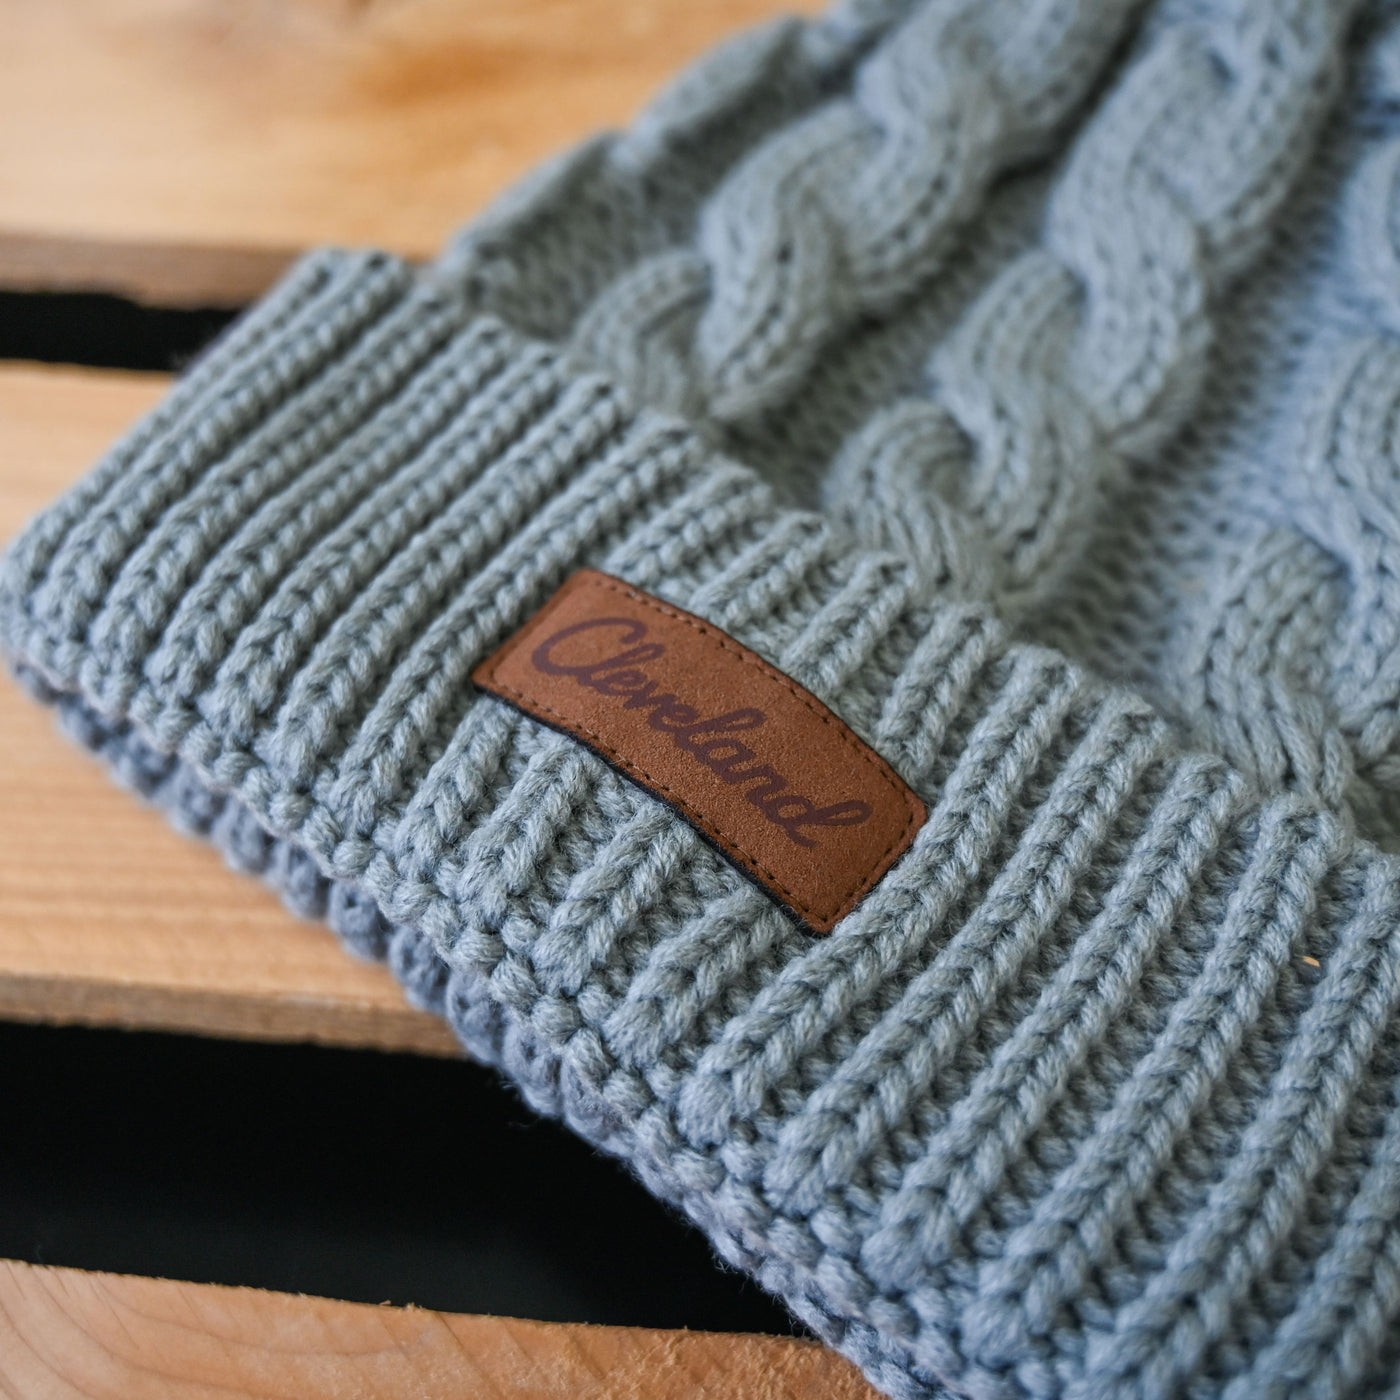 Cleveland Leather Patch Cable Knit Beanie - Grey